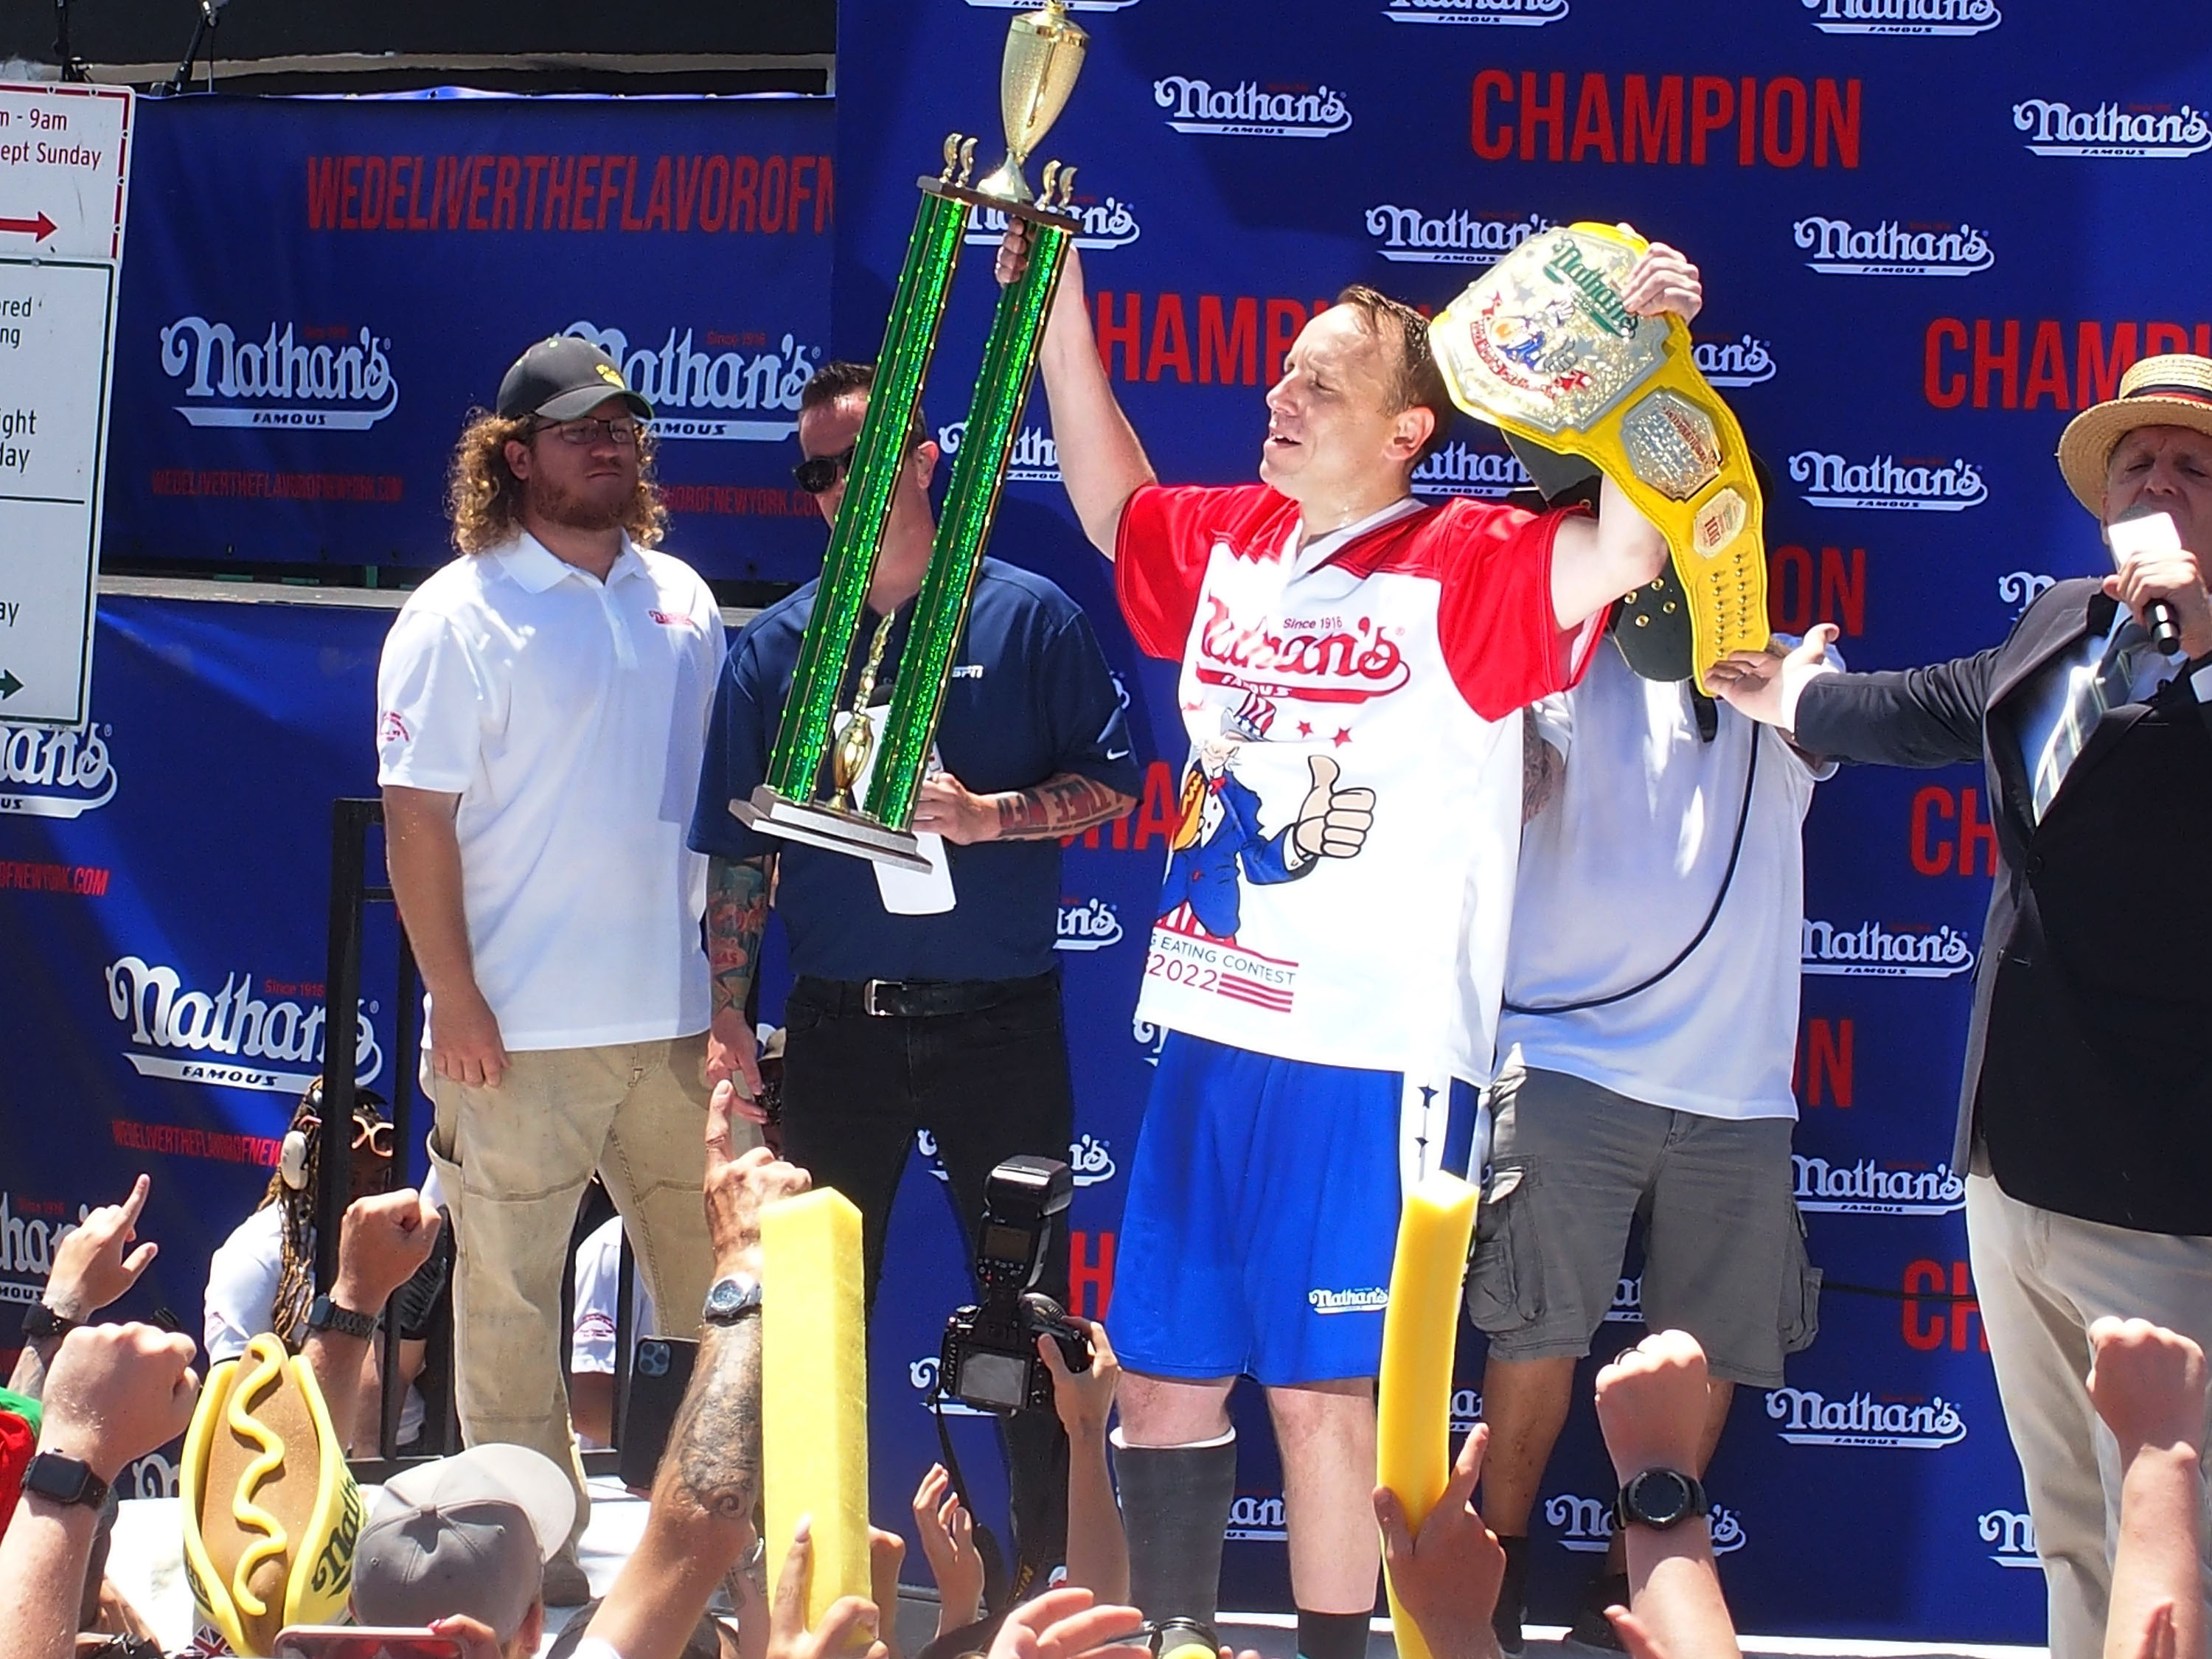 Competitive eater Joey Chestnut wins with 63 hot dogs in the men's division at the 2022 Nathan's Famous International Hot Dog Eating Contest.